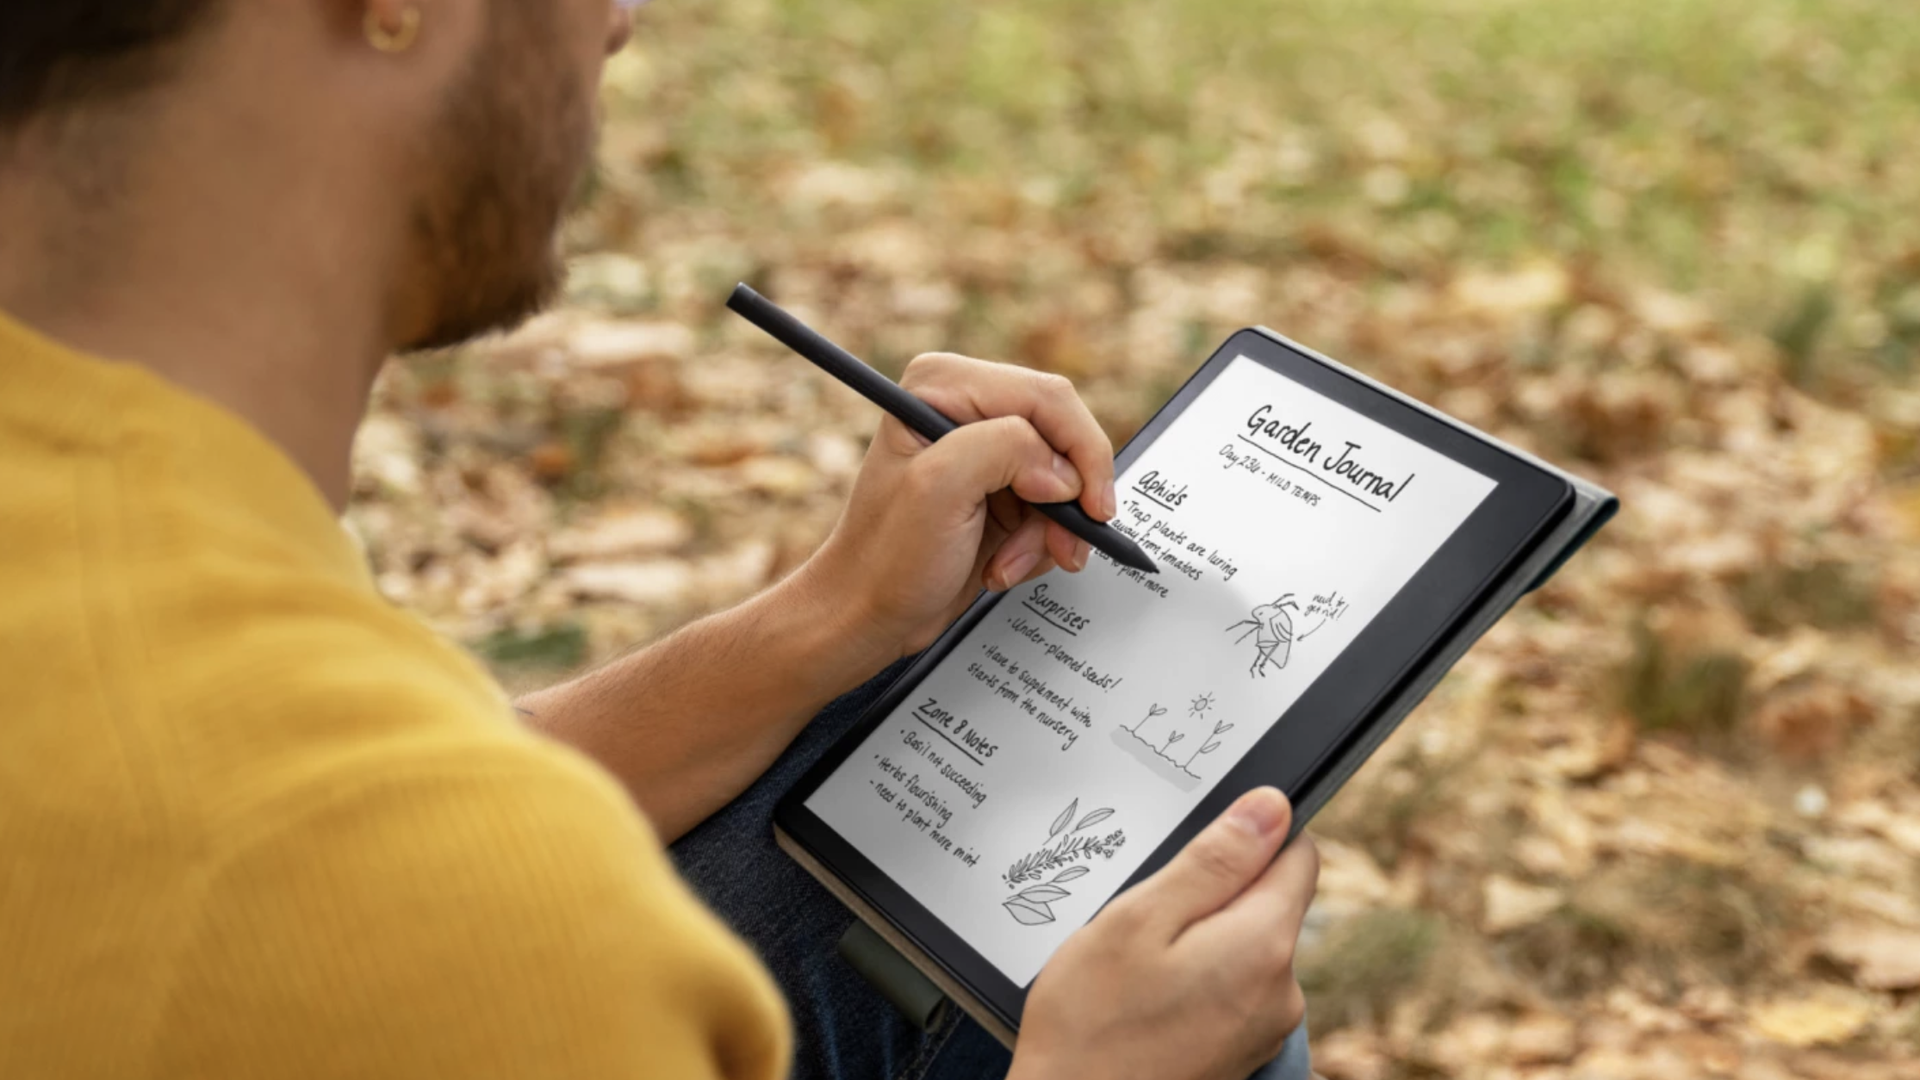 A man writes notes on a Kindle Scribe